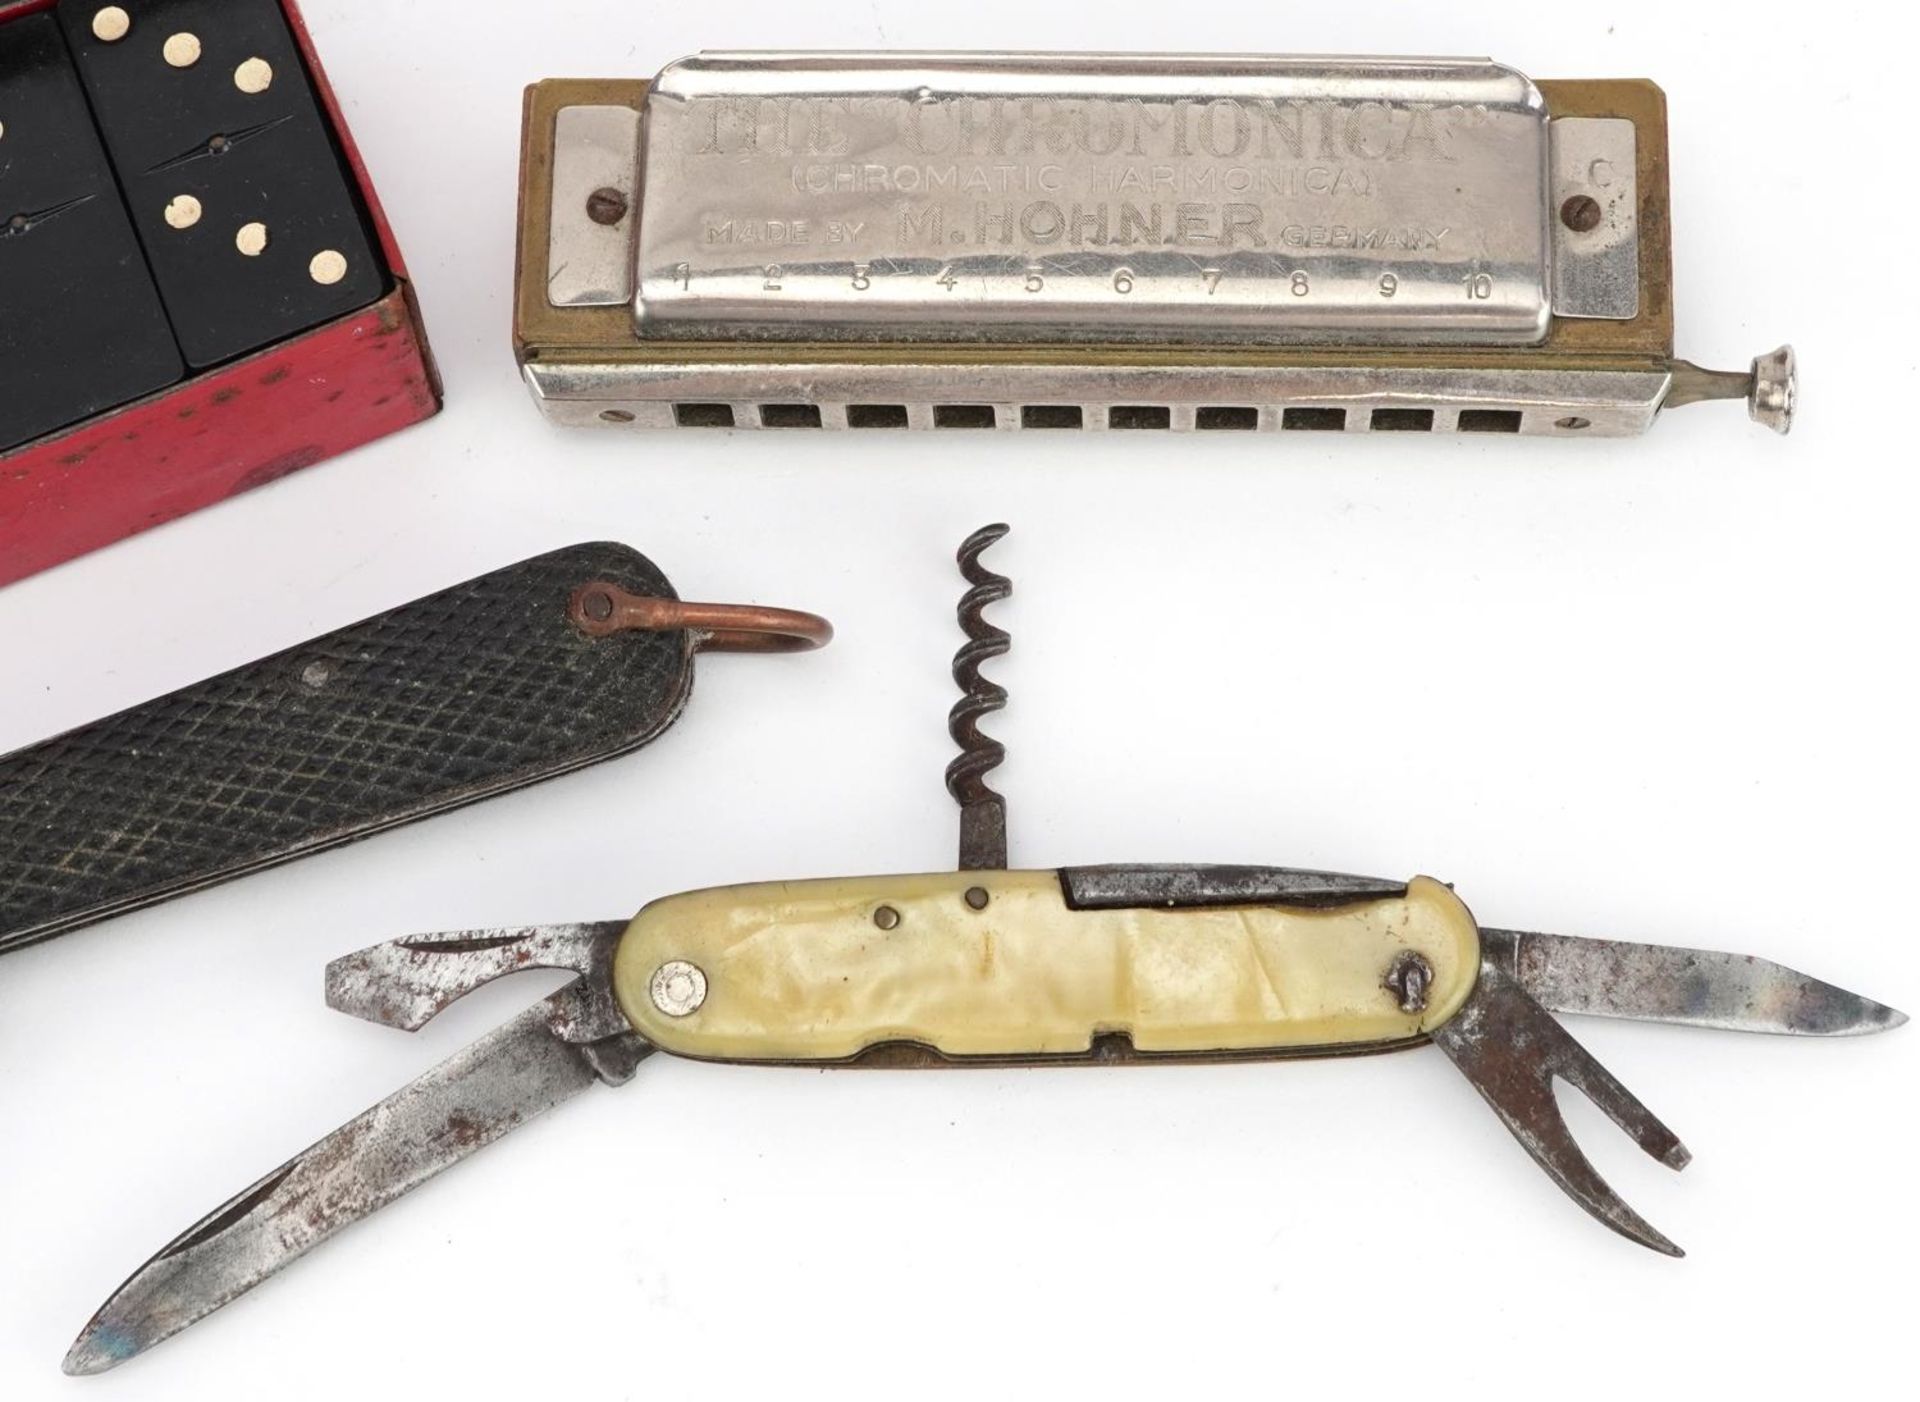 Sundry items including a folding pocket knife, M Hohner harmonica and Star Cigarettes advertising - Image 3 of 6